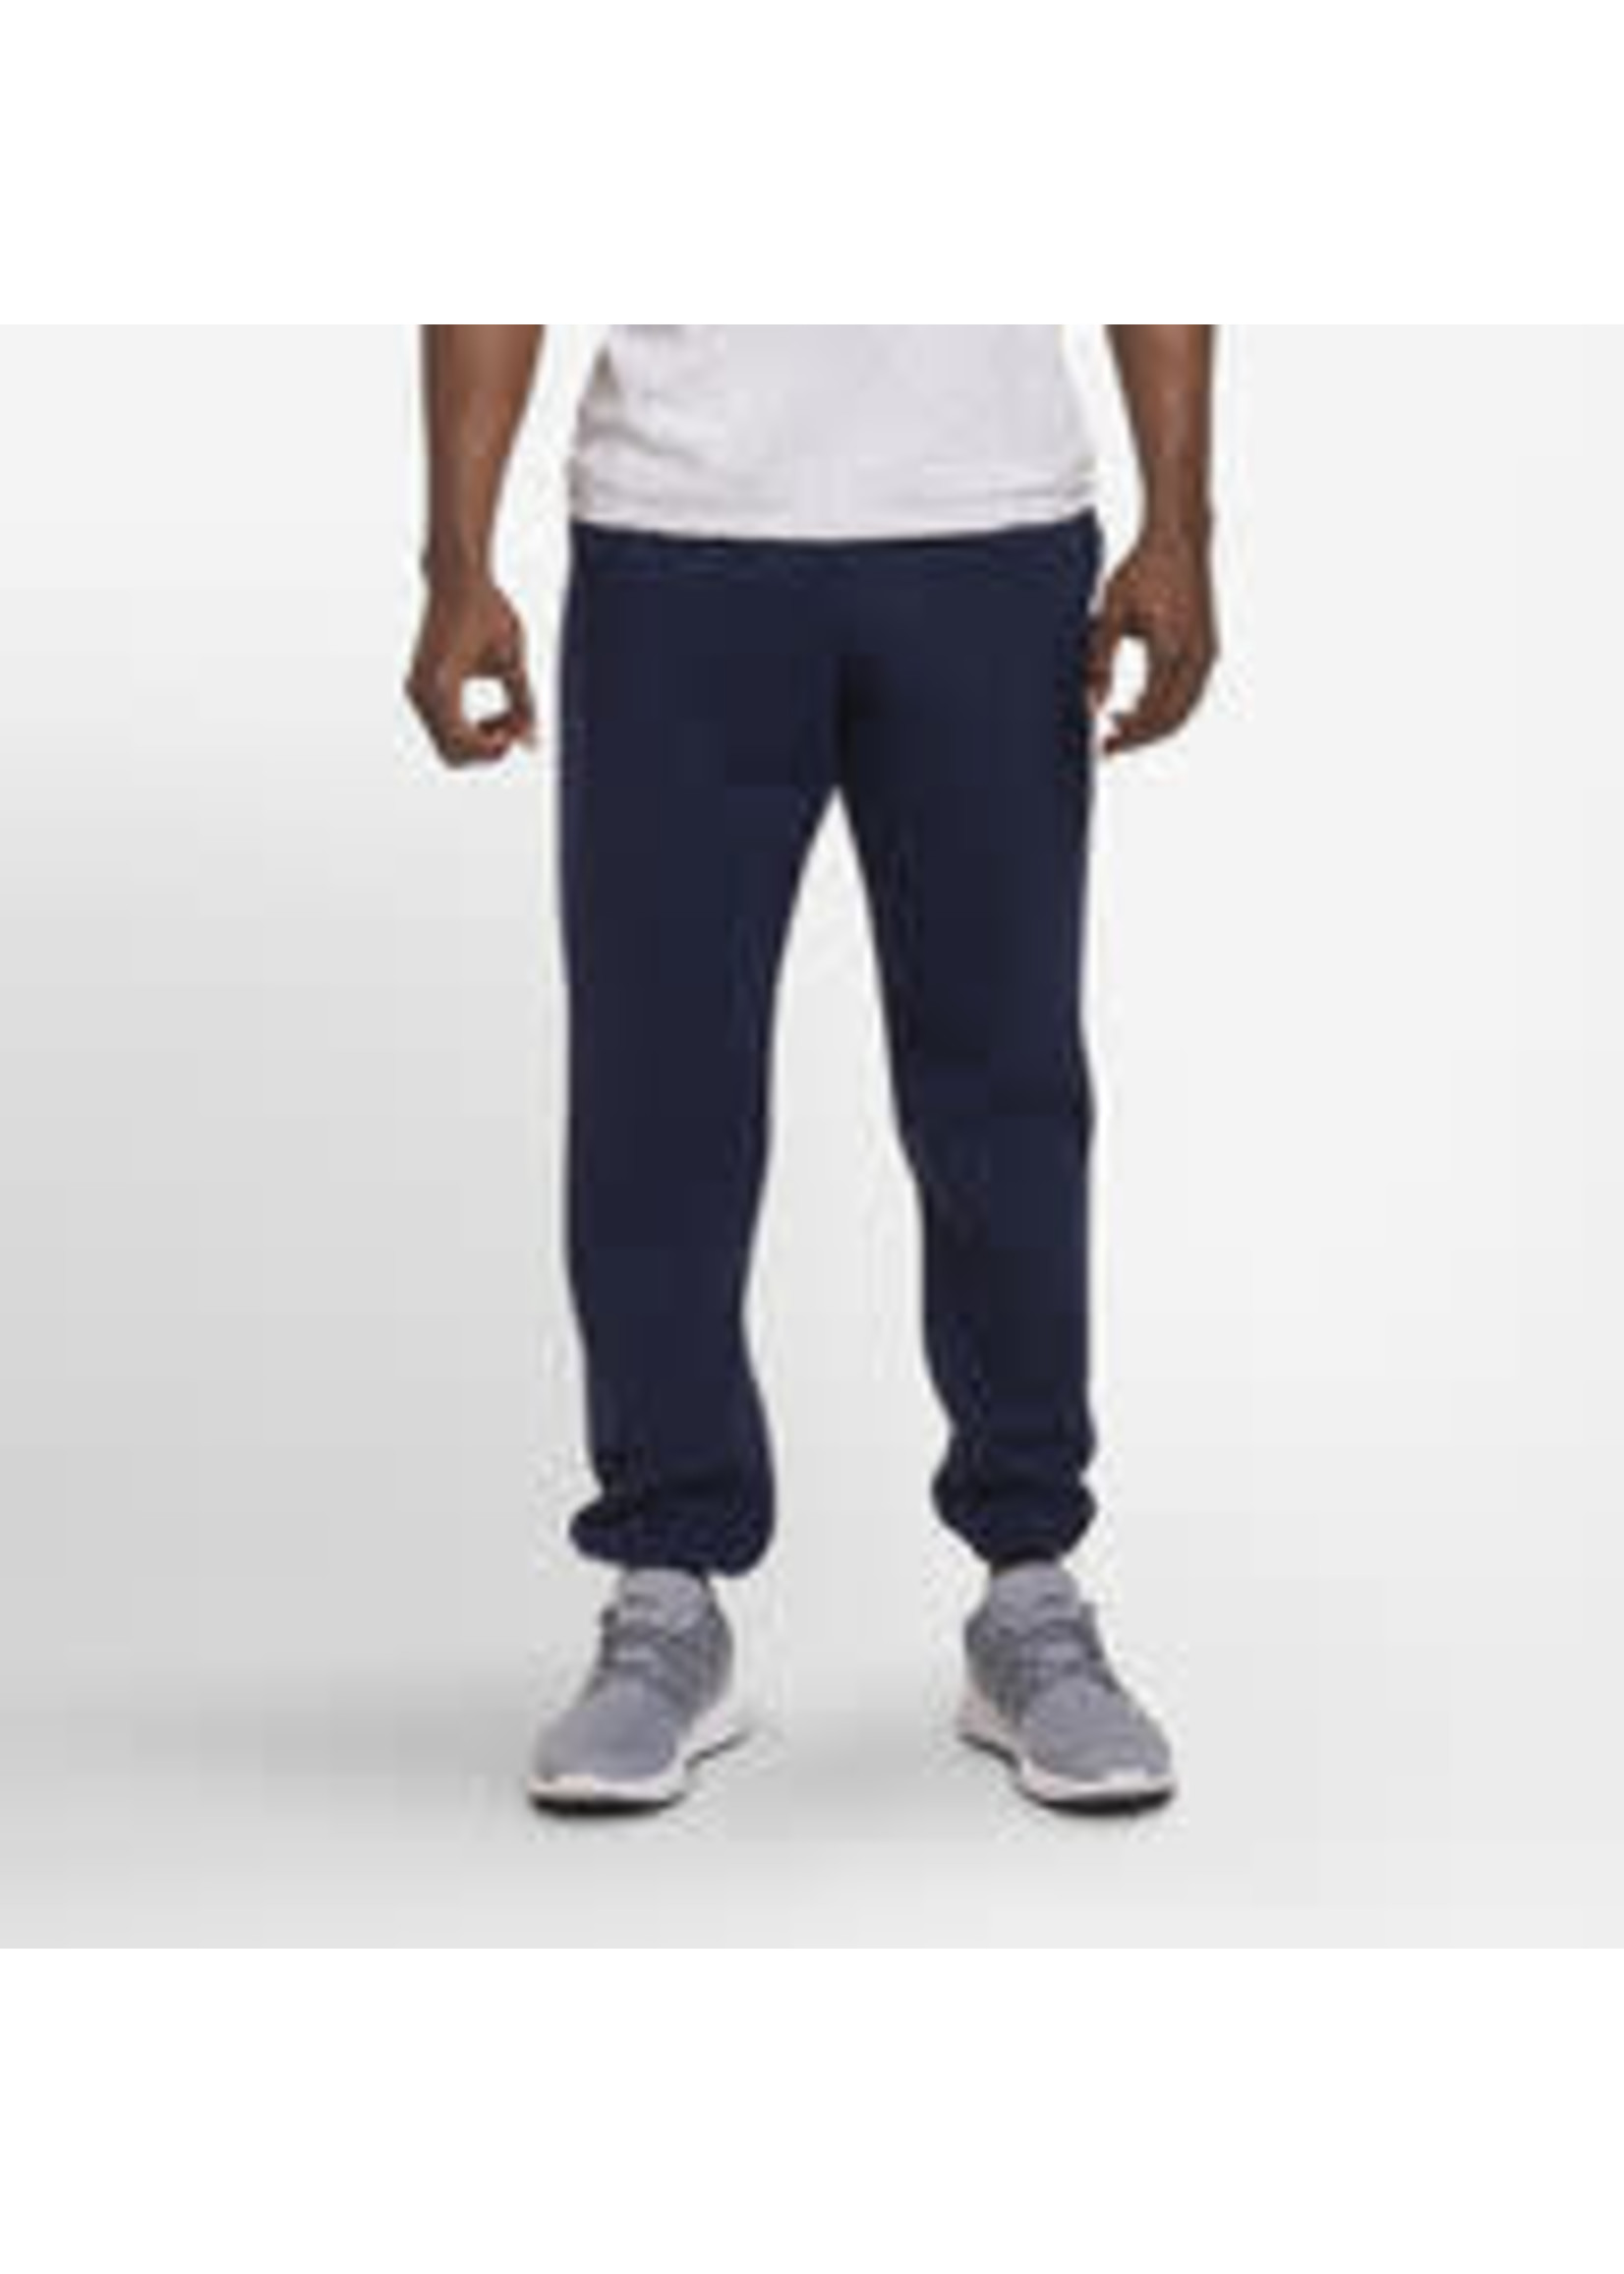 RUSSELL RUSSELL SWEAT PANTS ELASTIC BOTTOM W/ POCKETS